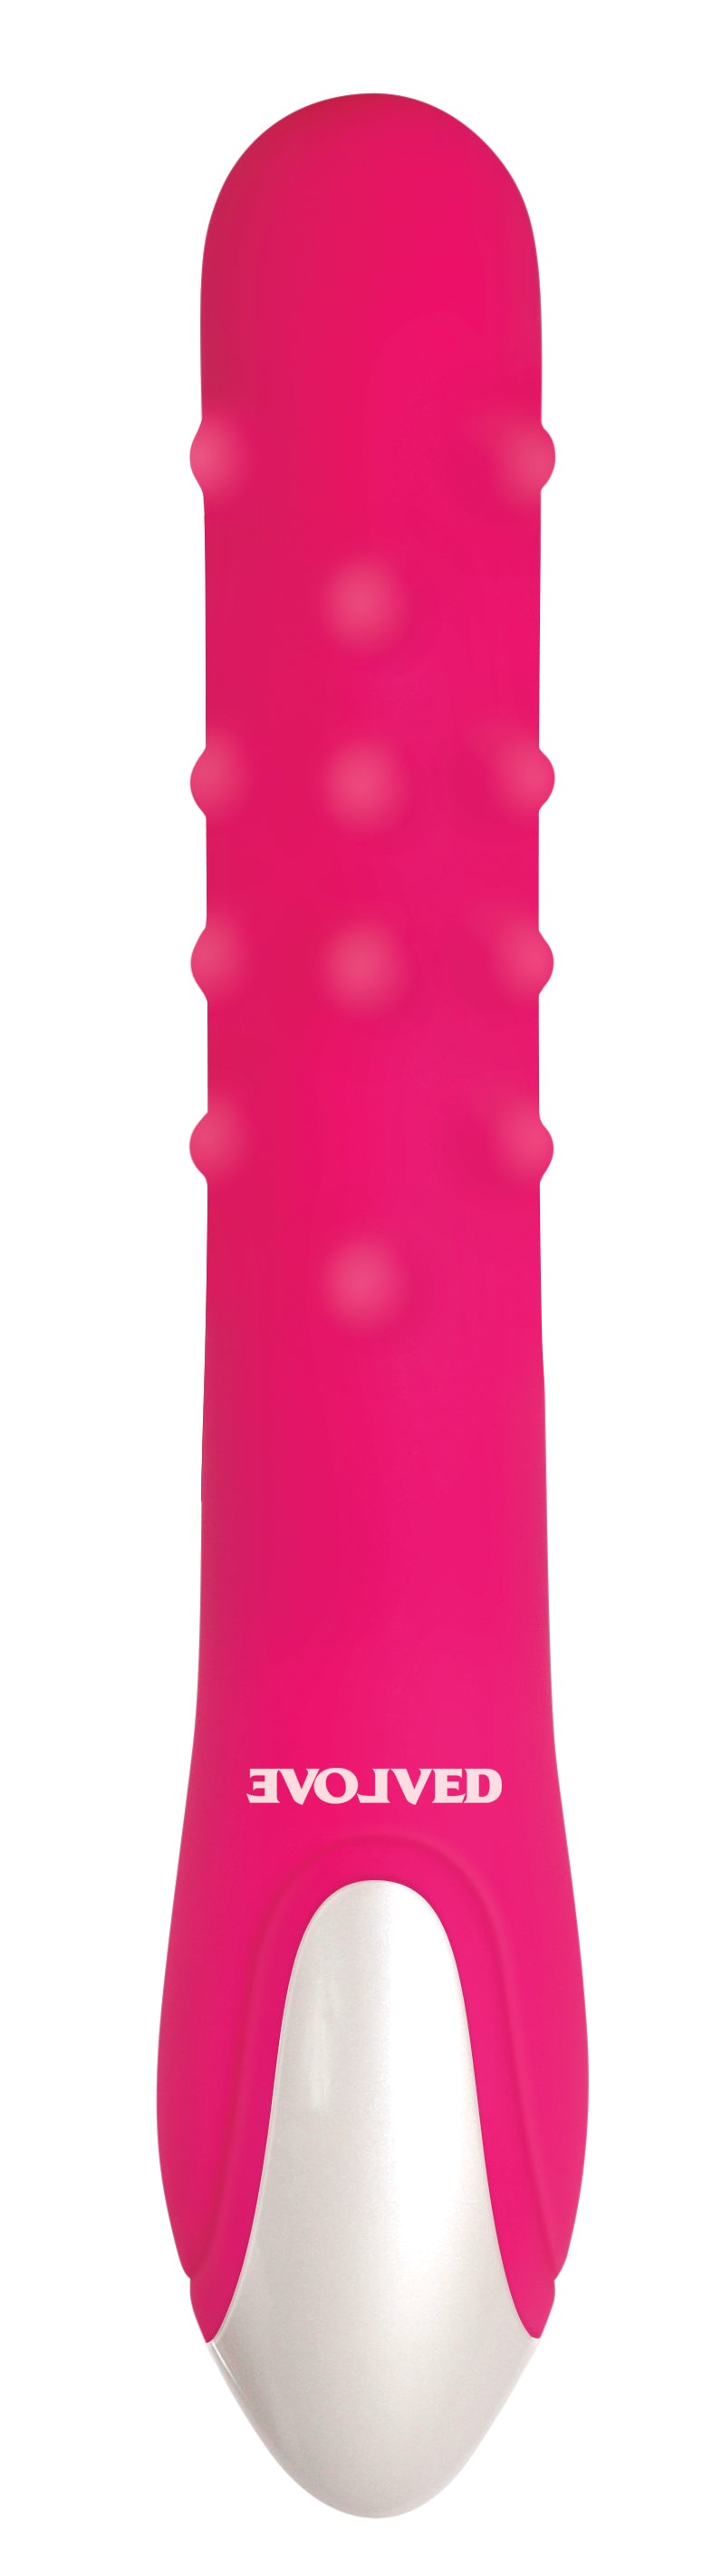 Customizable Pleasure with Love Spun Bunny Vibrator - Waterproof and Rechargeable